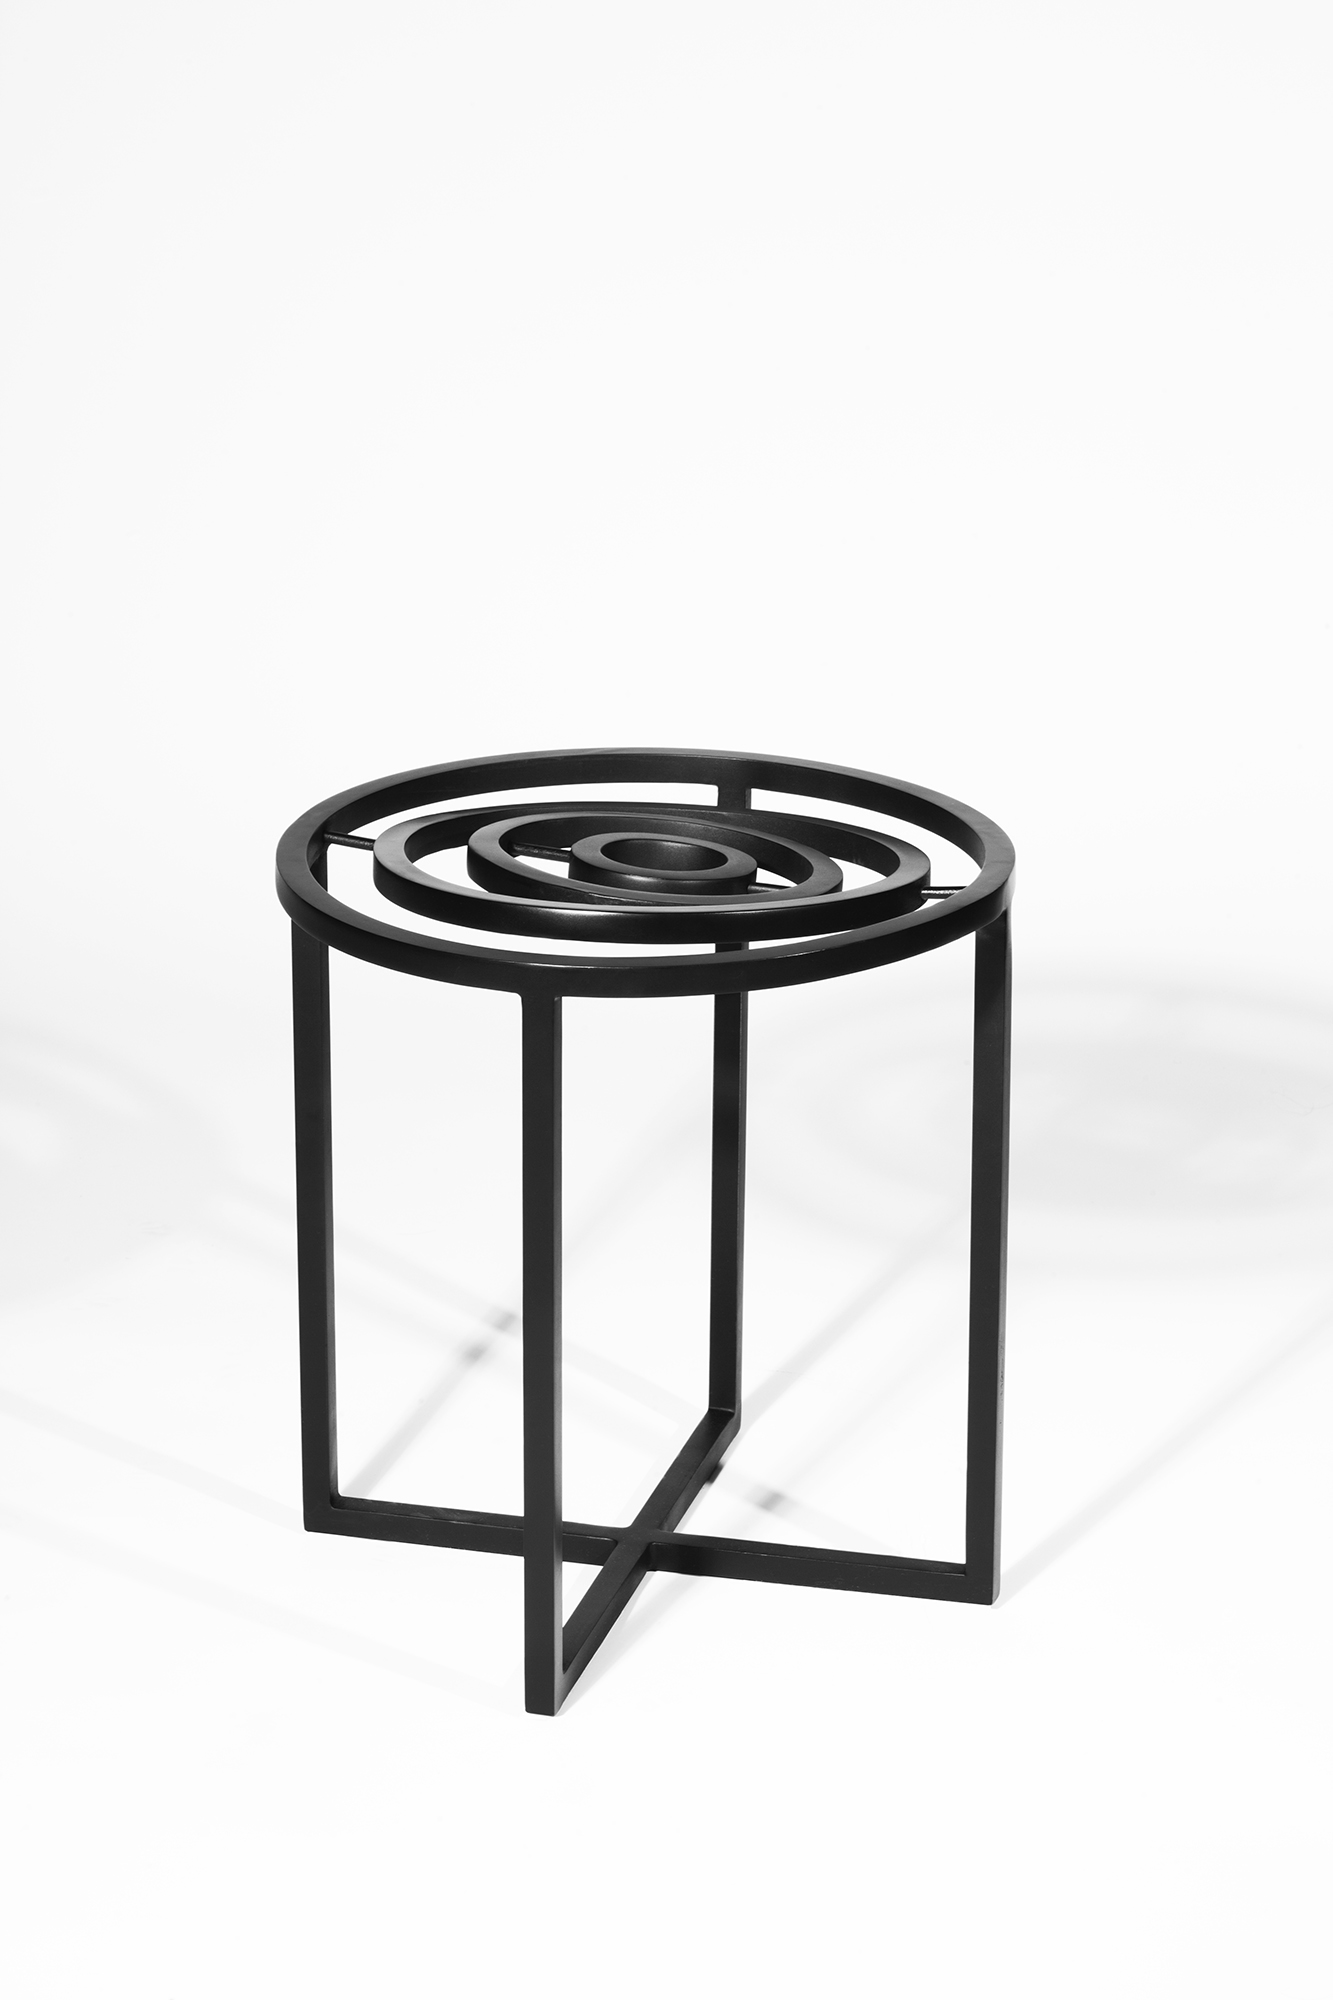 Gyro Stool by XYZ Integrated Architecture